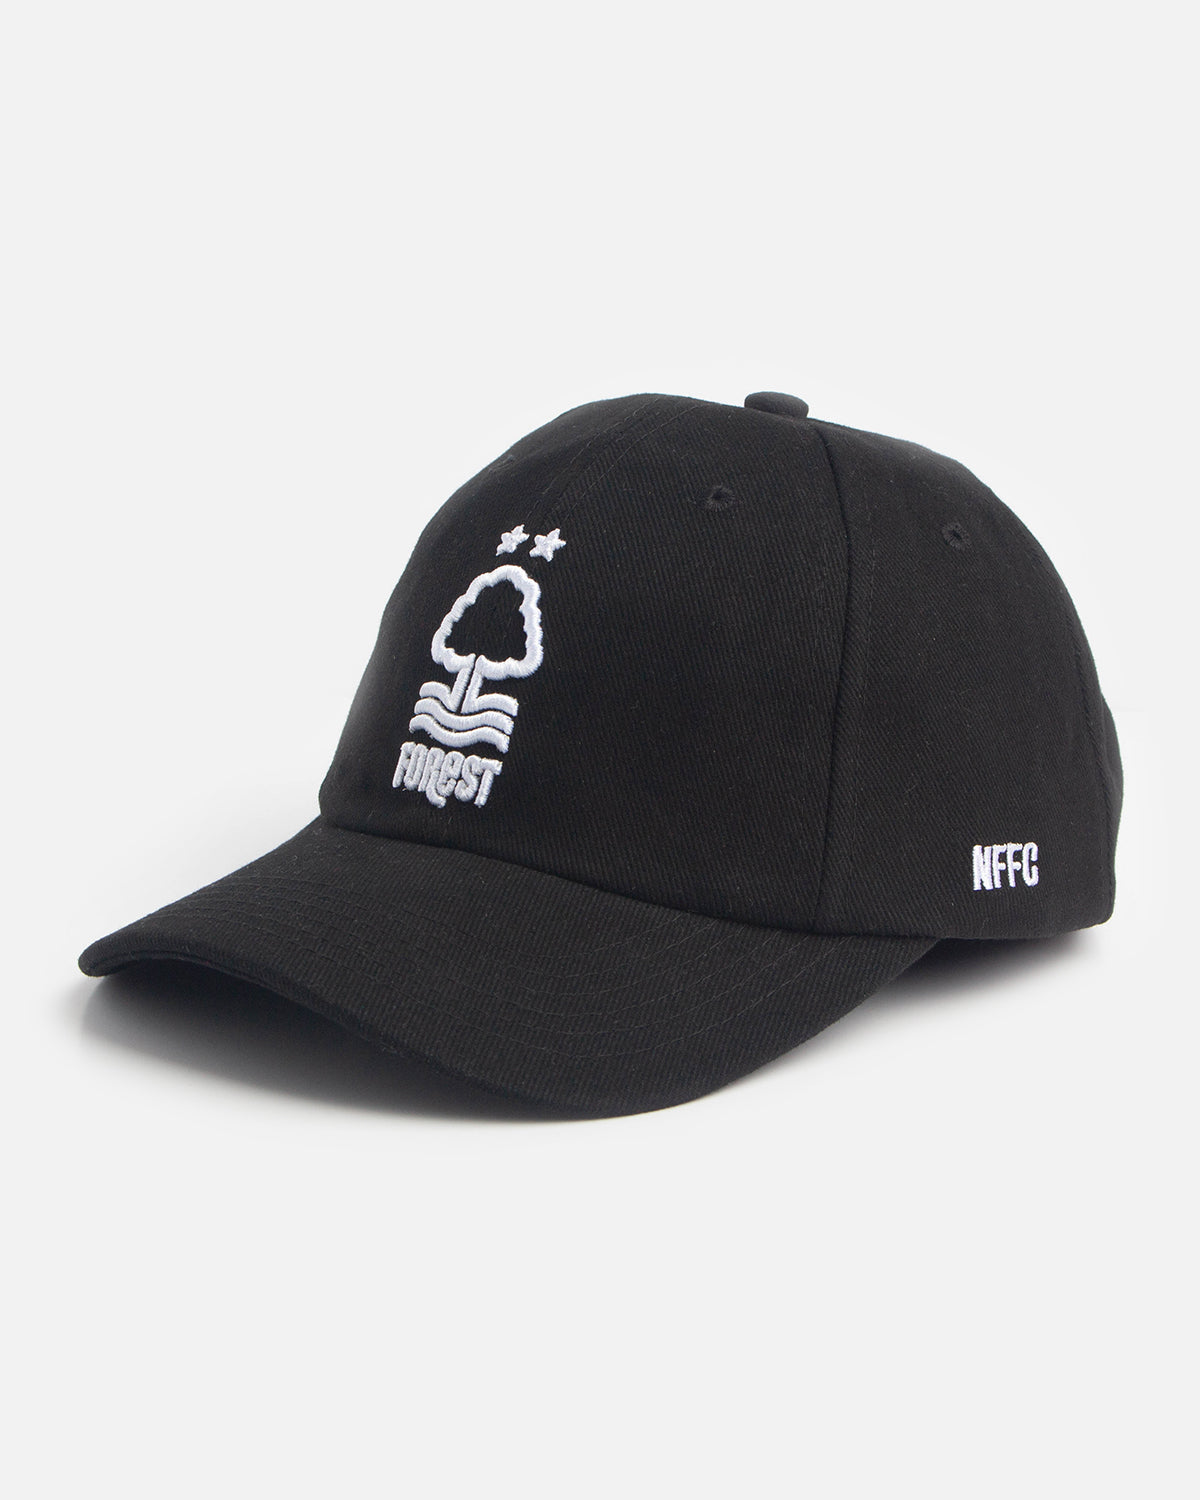 NFFC Junior Black Relaxed Fit Cap